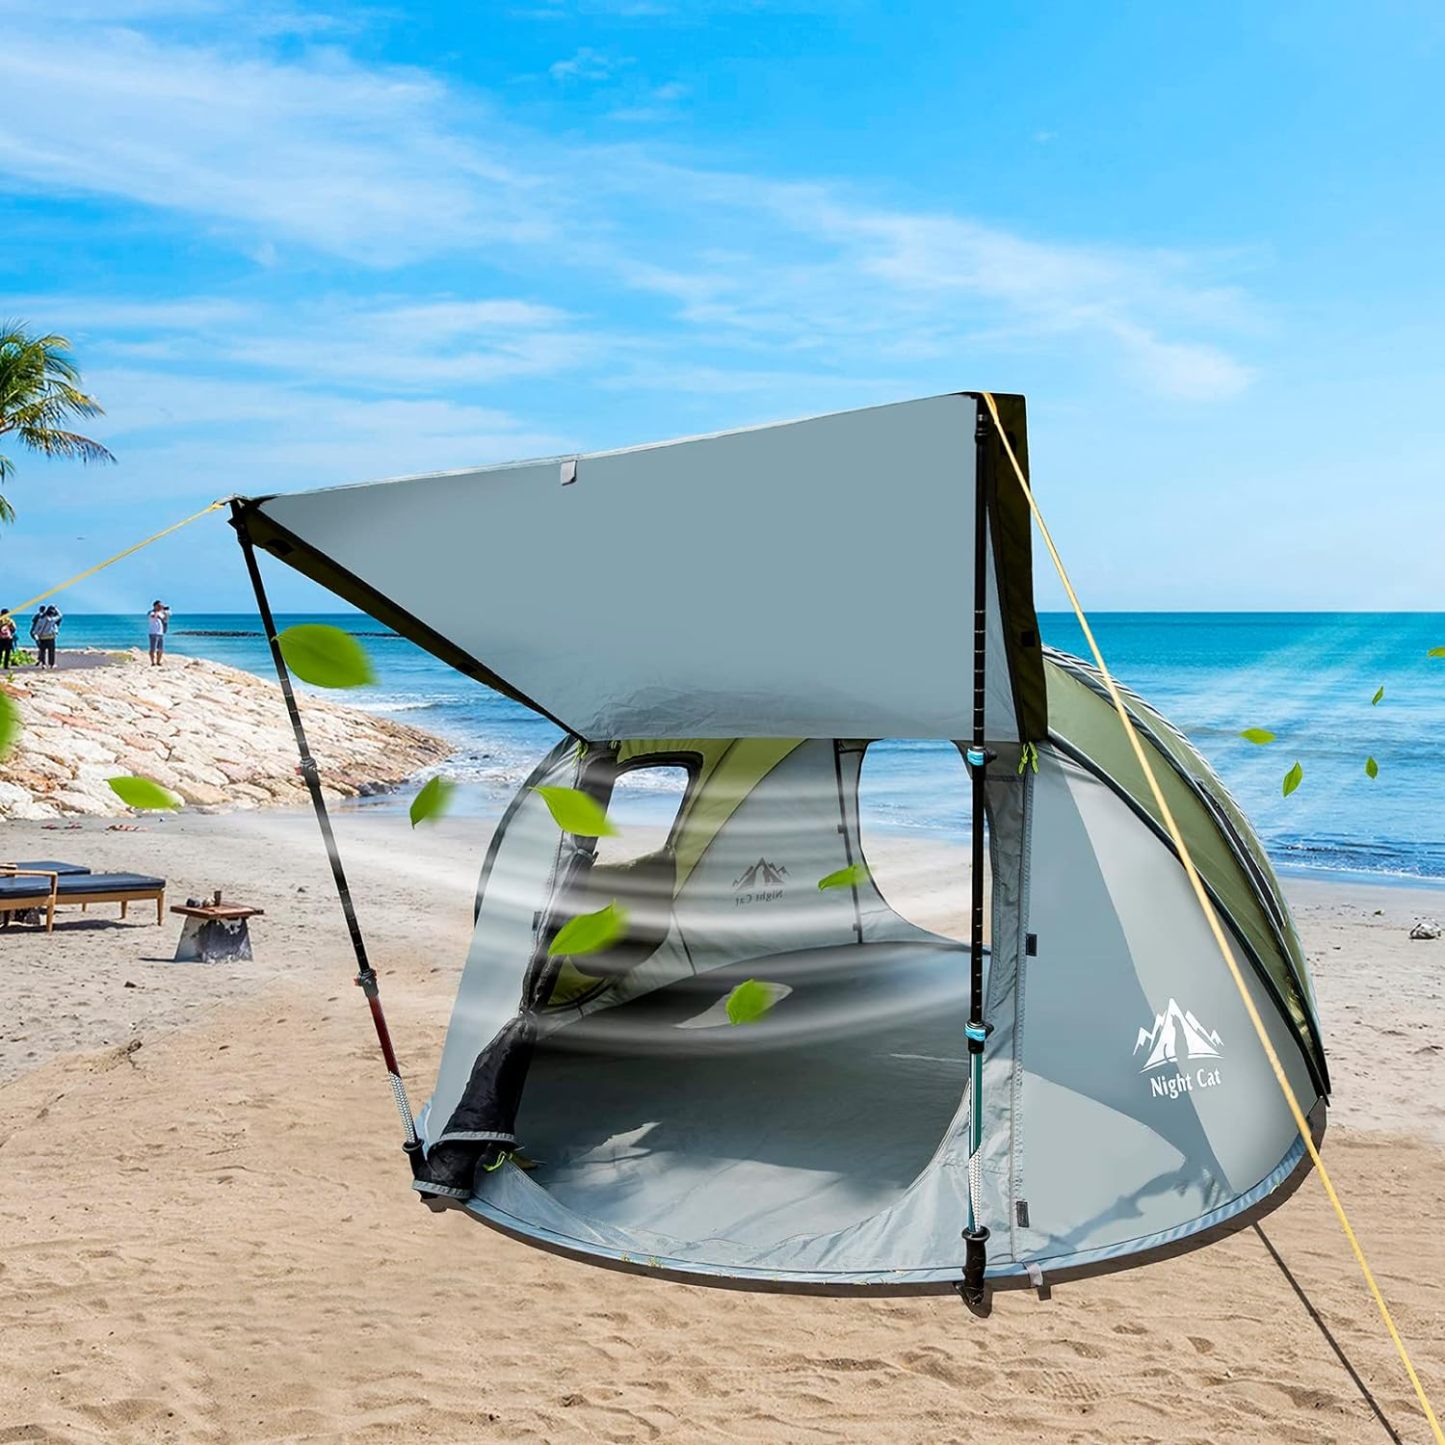 Night Cat Upgraded Pop up Tent 2-4 Persons Easy Setup in 3 Seconds Instant Camping Tent with Porch Automatic Foldable Waterproof Beach Package 40% Smaller